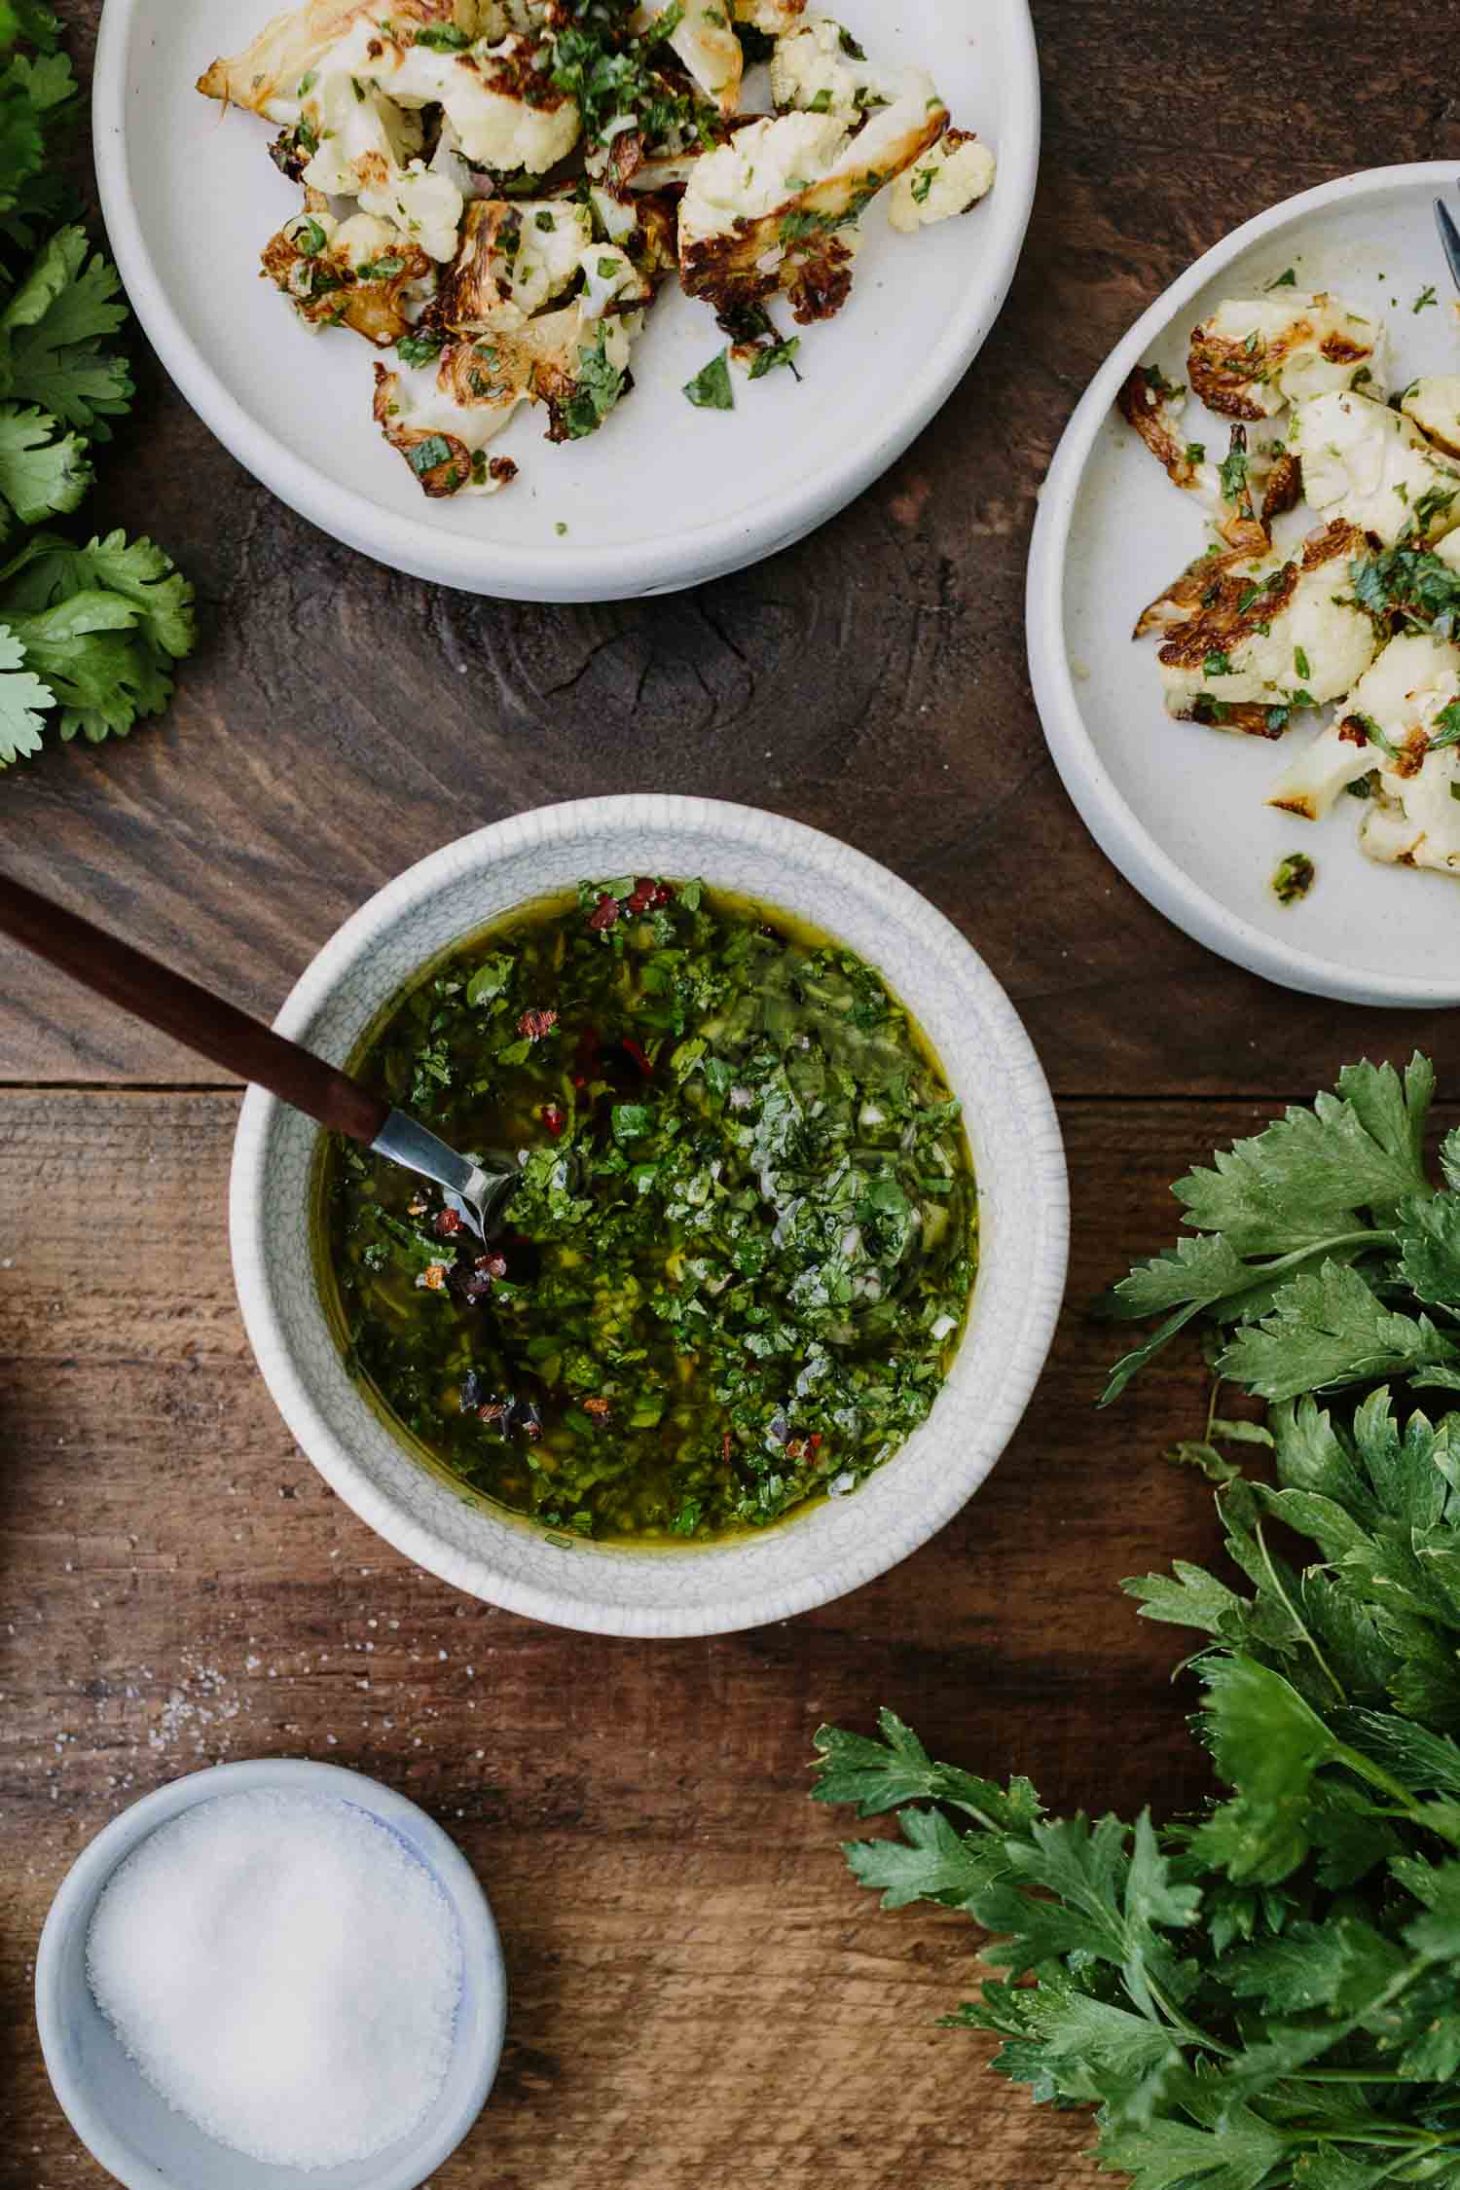 Chimichurri | Cooking Component